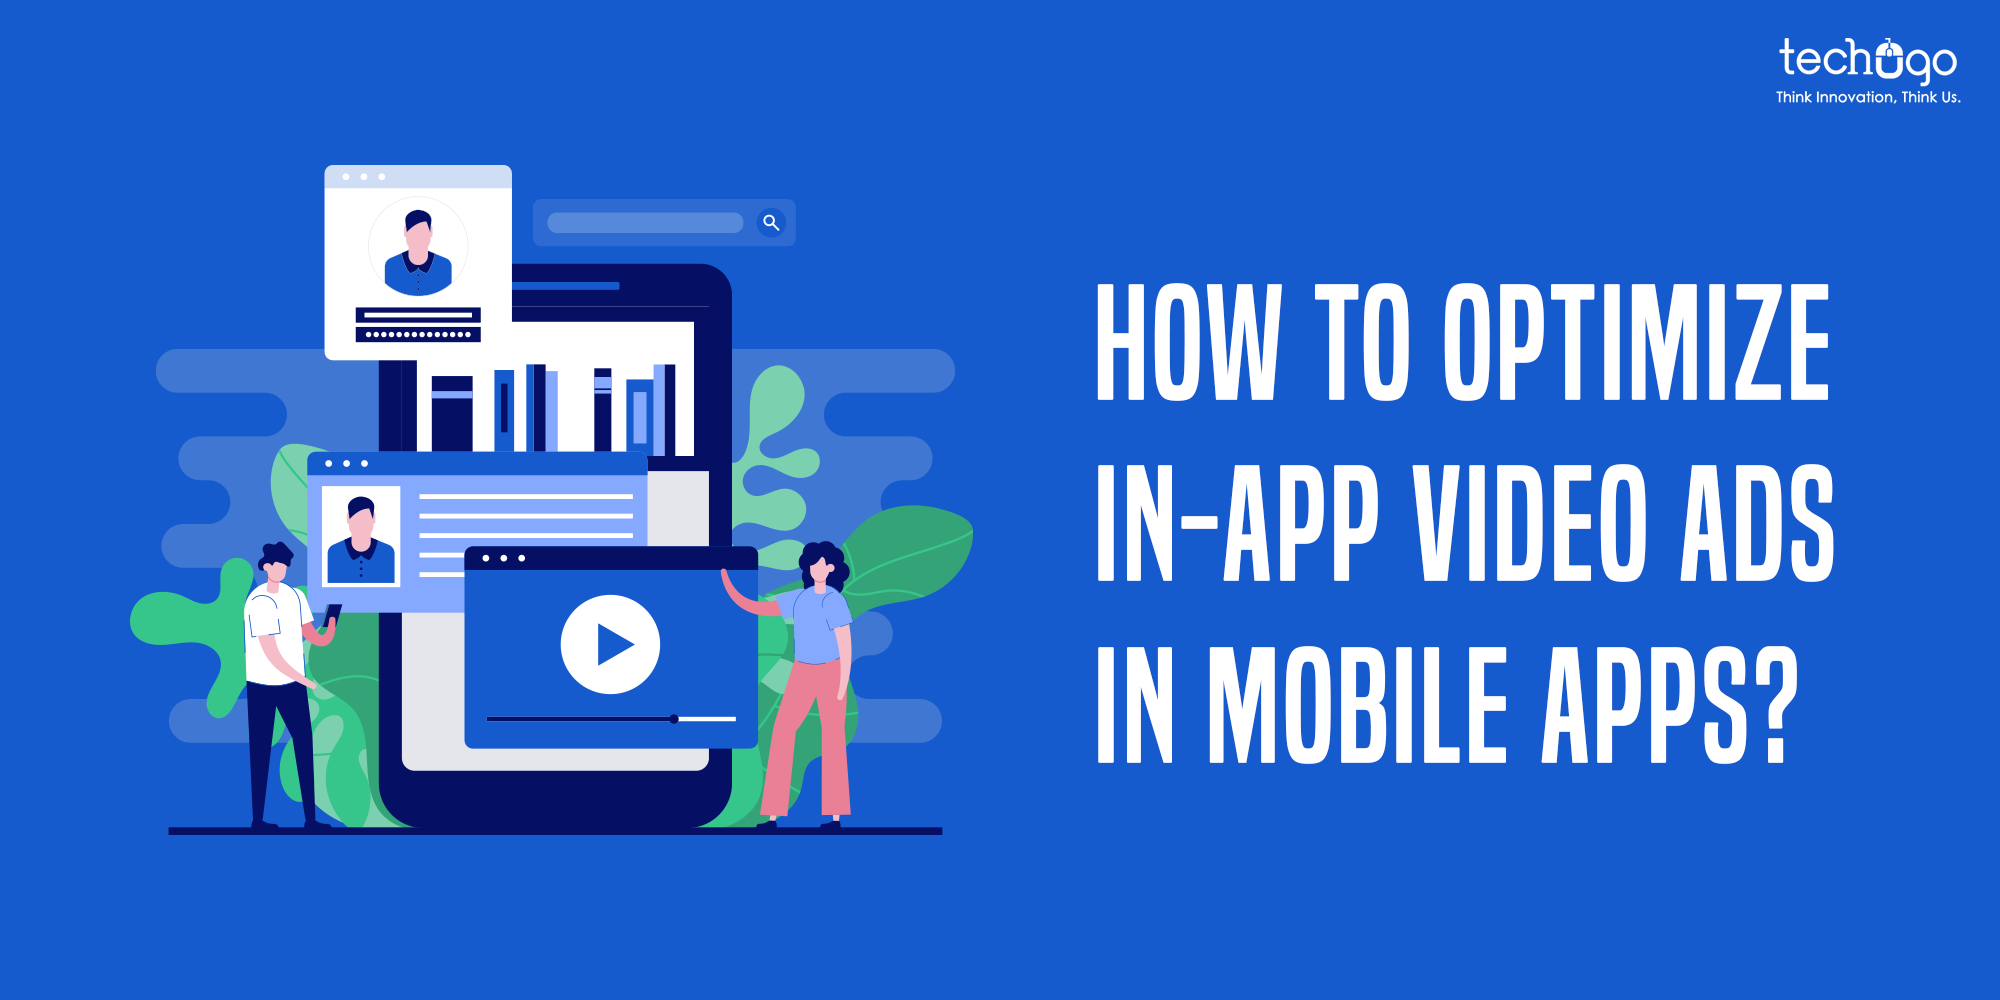 How To Optimize In-App Video Ads In Mobile Apps?